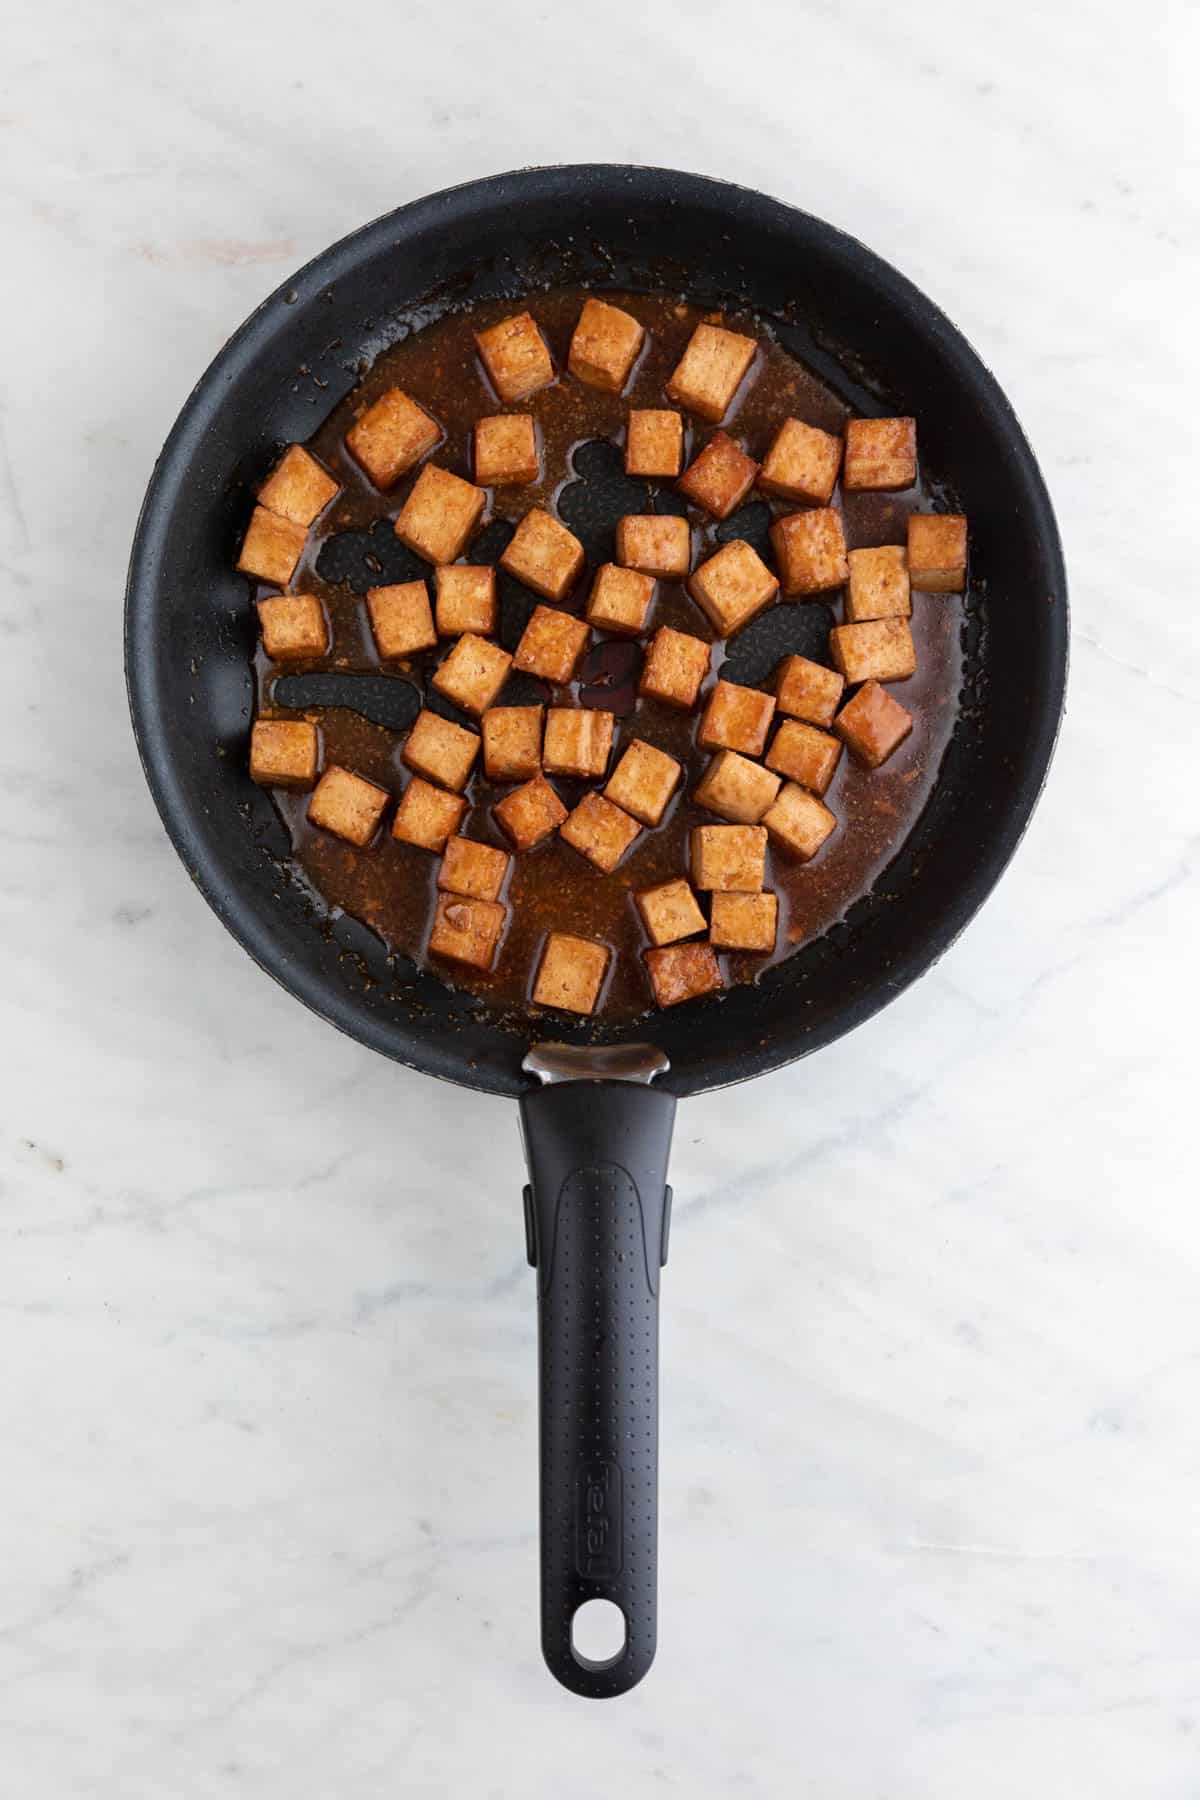 Marinated tofu cubes cooked in a non-stick pan after adding the sauce.